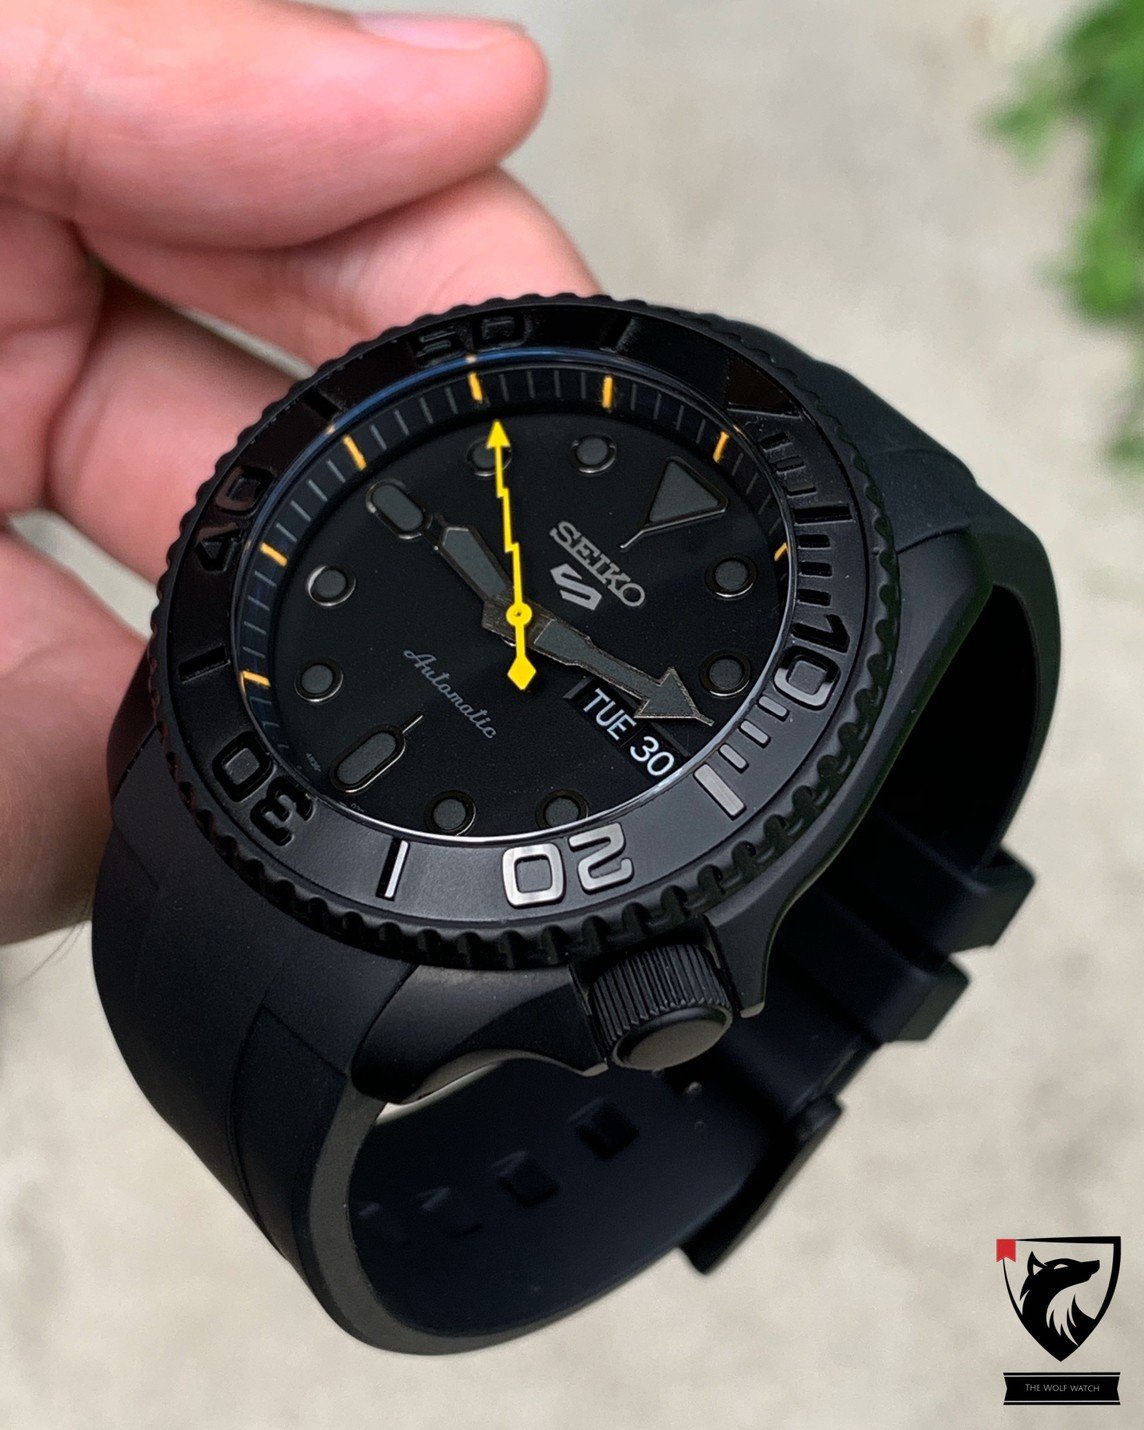 The BumbleBee Stealth Edition - thewolfwatchofficial